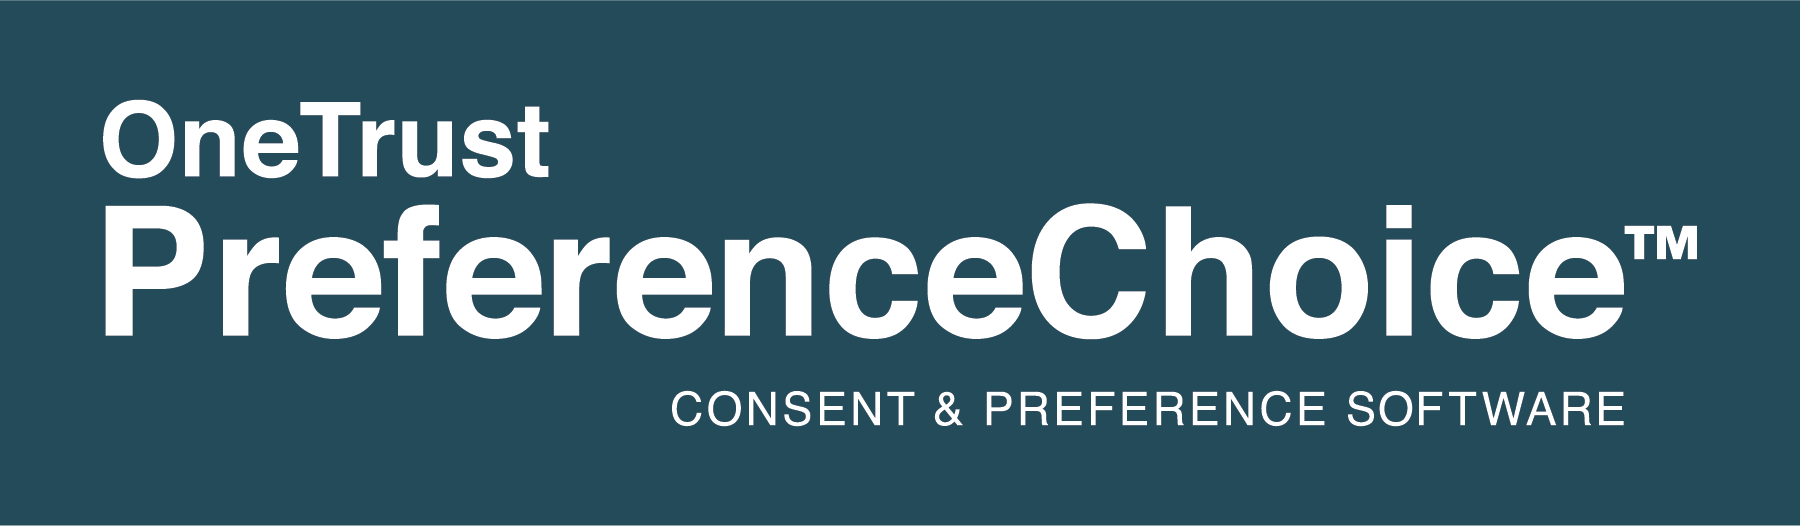 OneTrust PreferenceChoice™